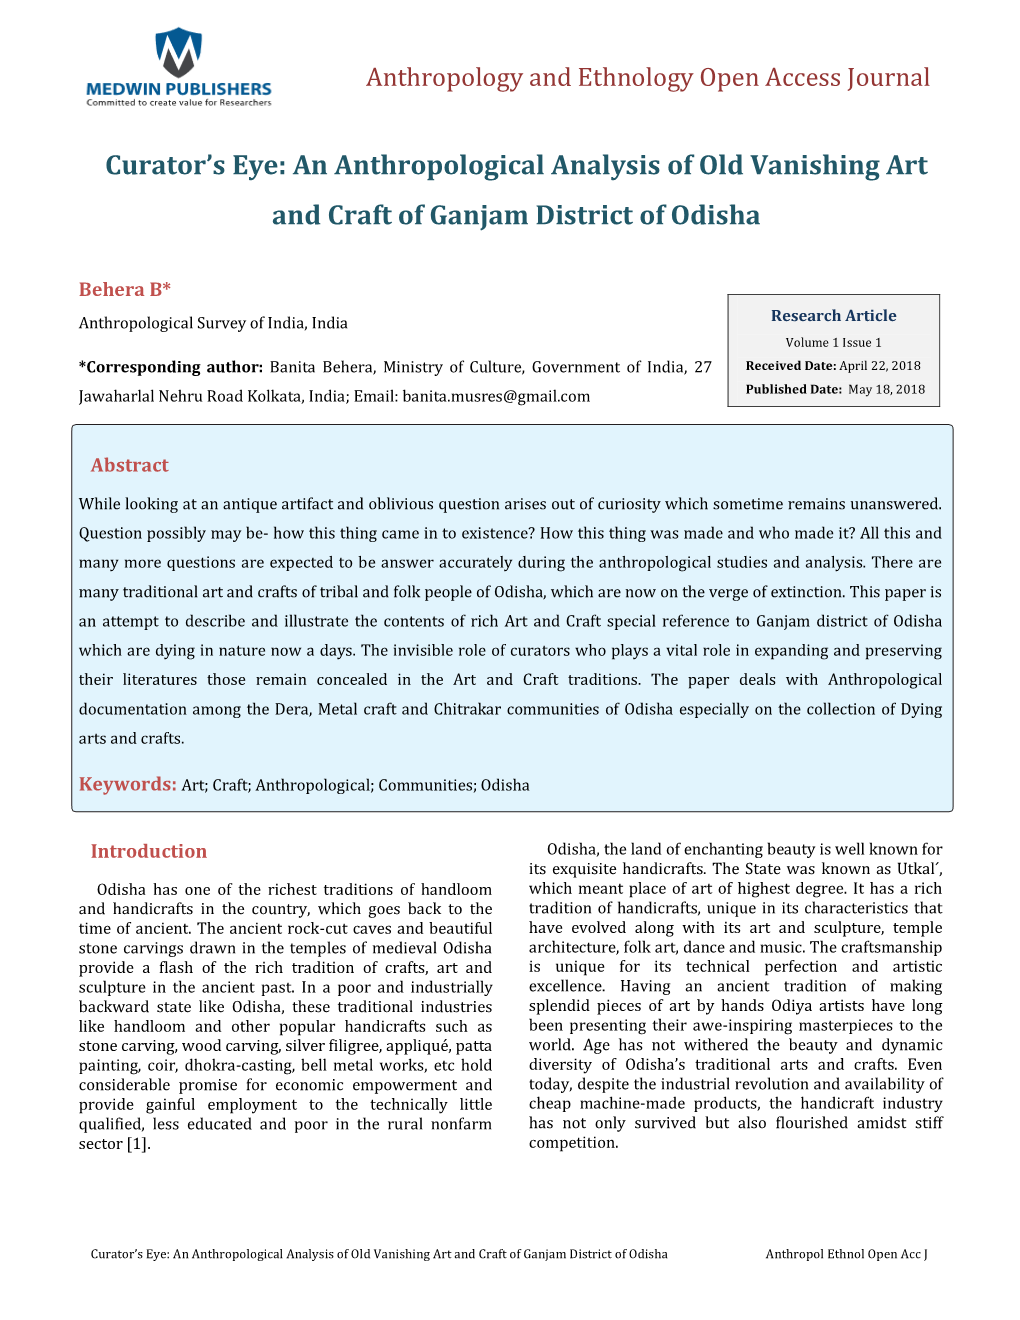 An Anthropological Analysis of Old Vanishing Art and Craft of Ganjam District of Odisha